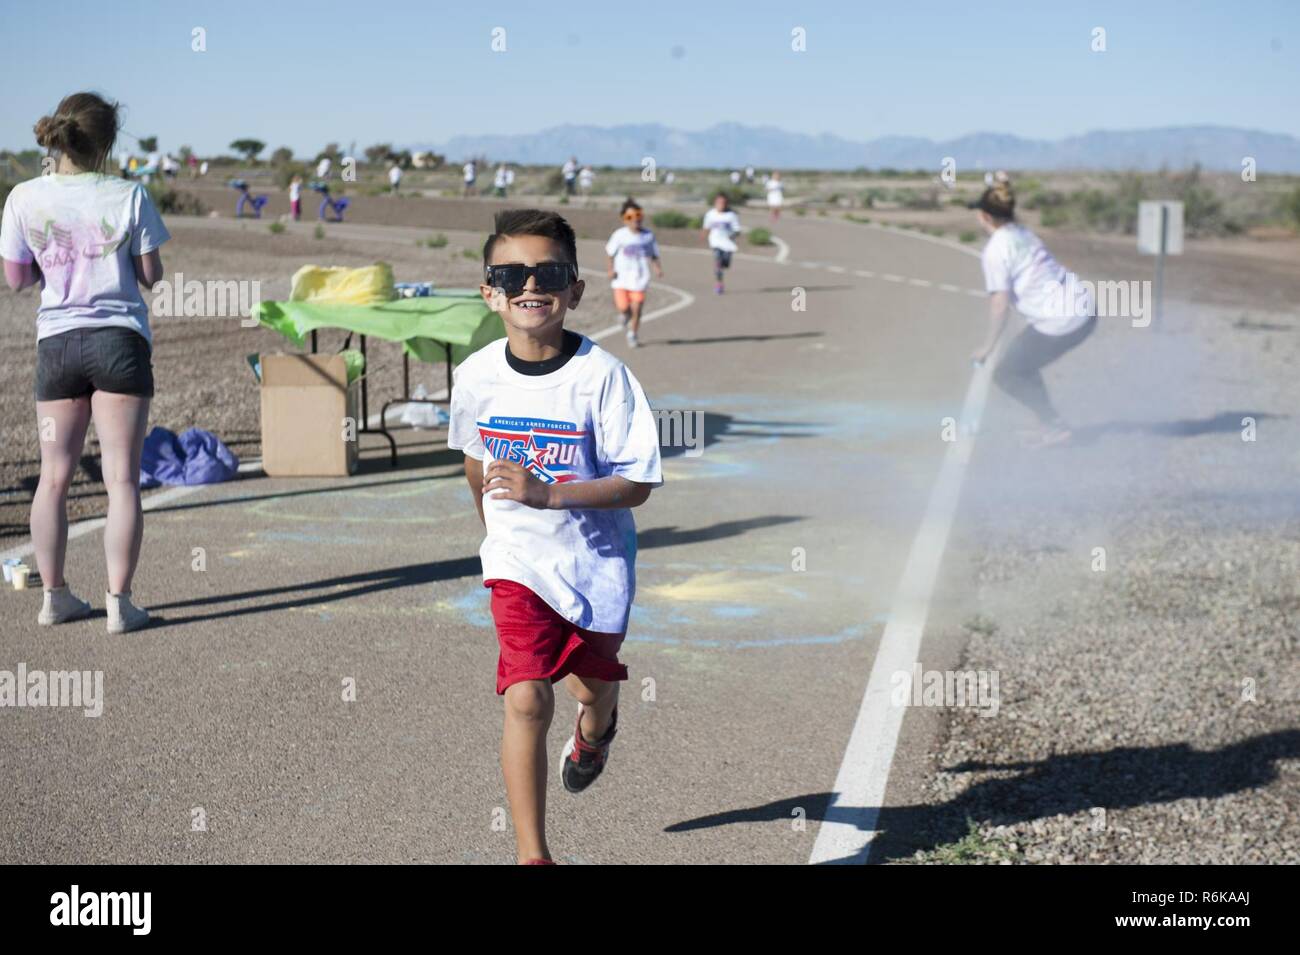 The Youth And Teen Center Hosted The Art Blast Color Run 5k And